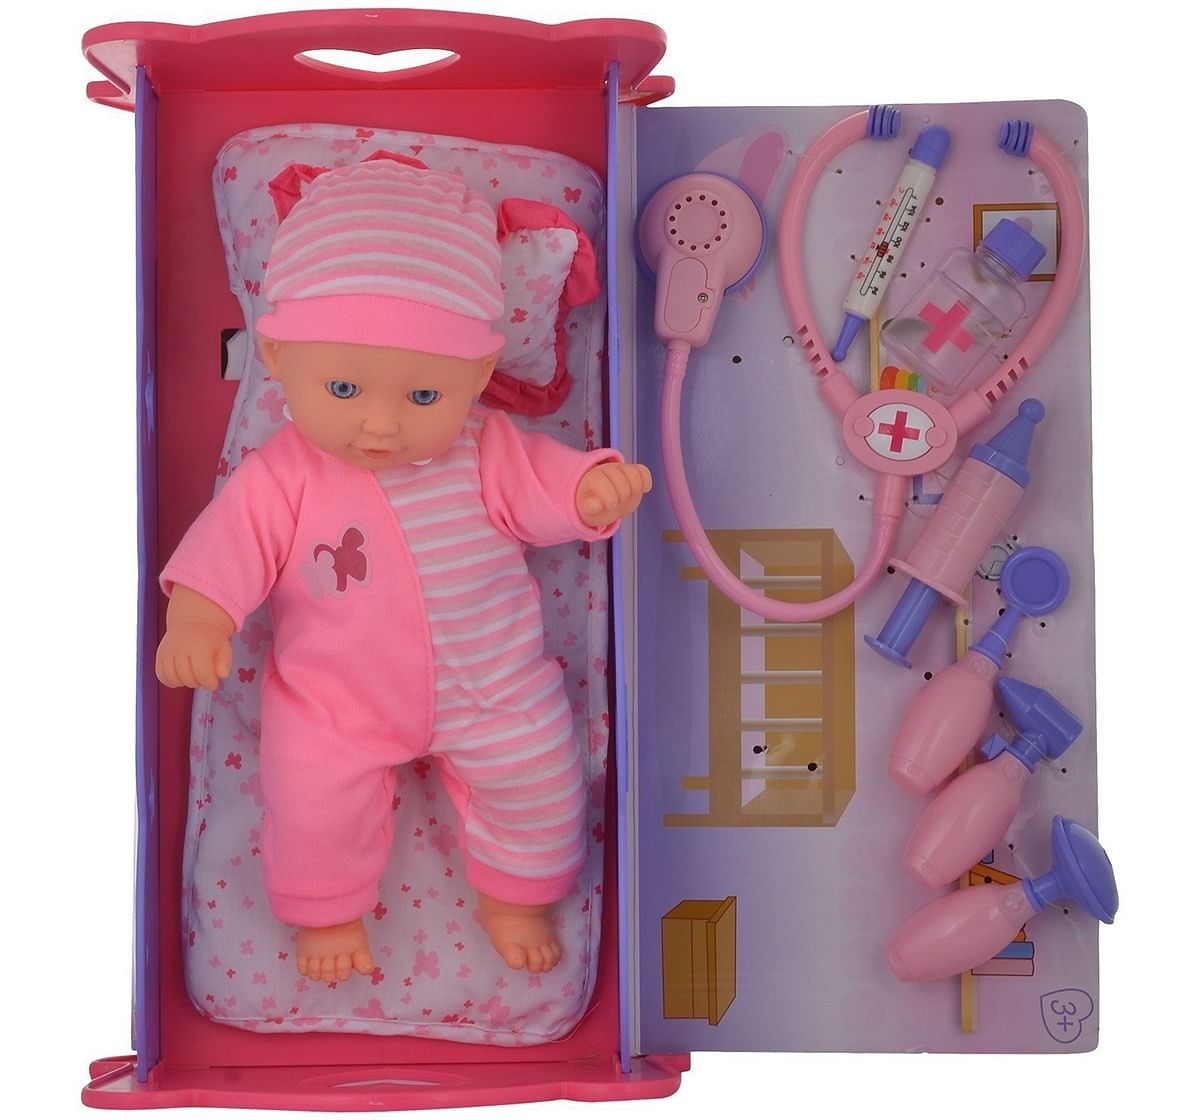 Baby ELLIE Baby Doll Deluxe Doctor Set (Pink) Dolls & Accessories for age 3Y+ 